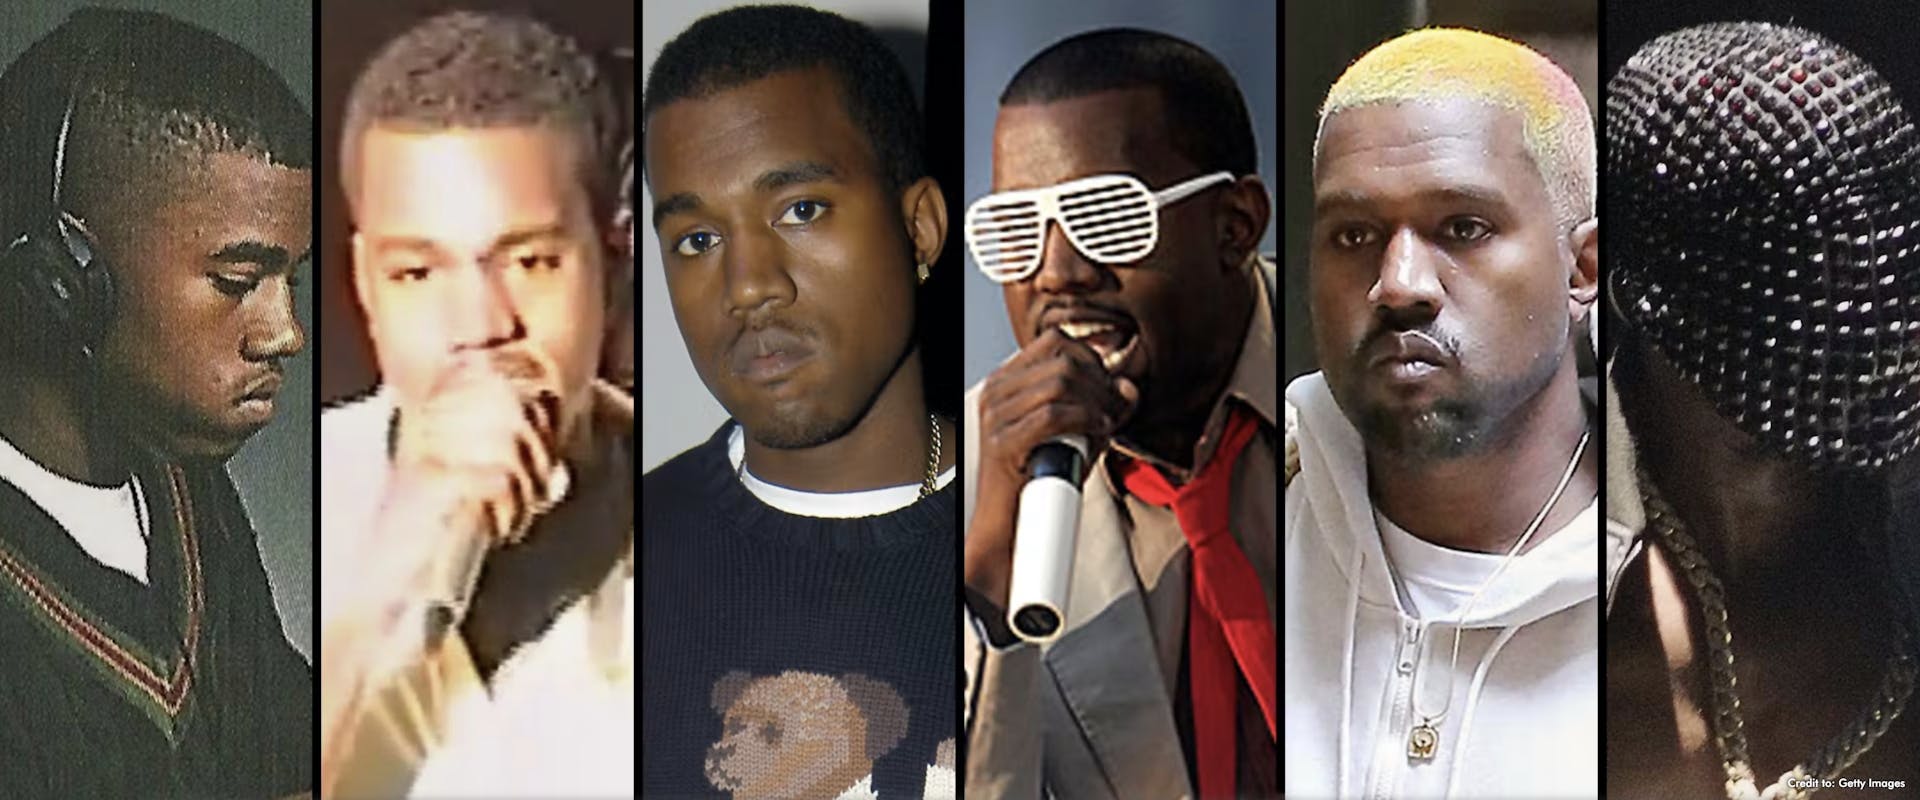 8. Kanye West's Blonde Hair: The Evolution of His Hairstyles - wide 2